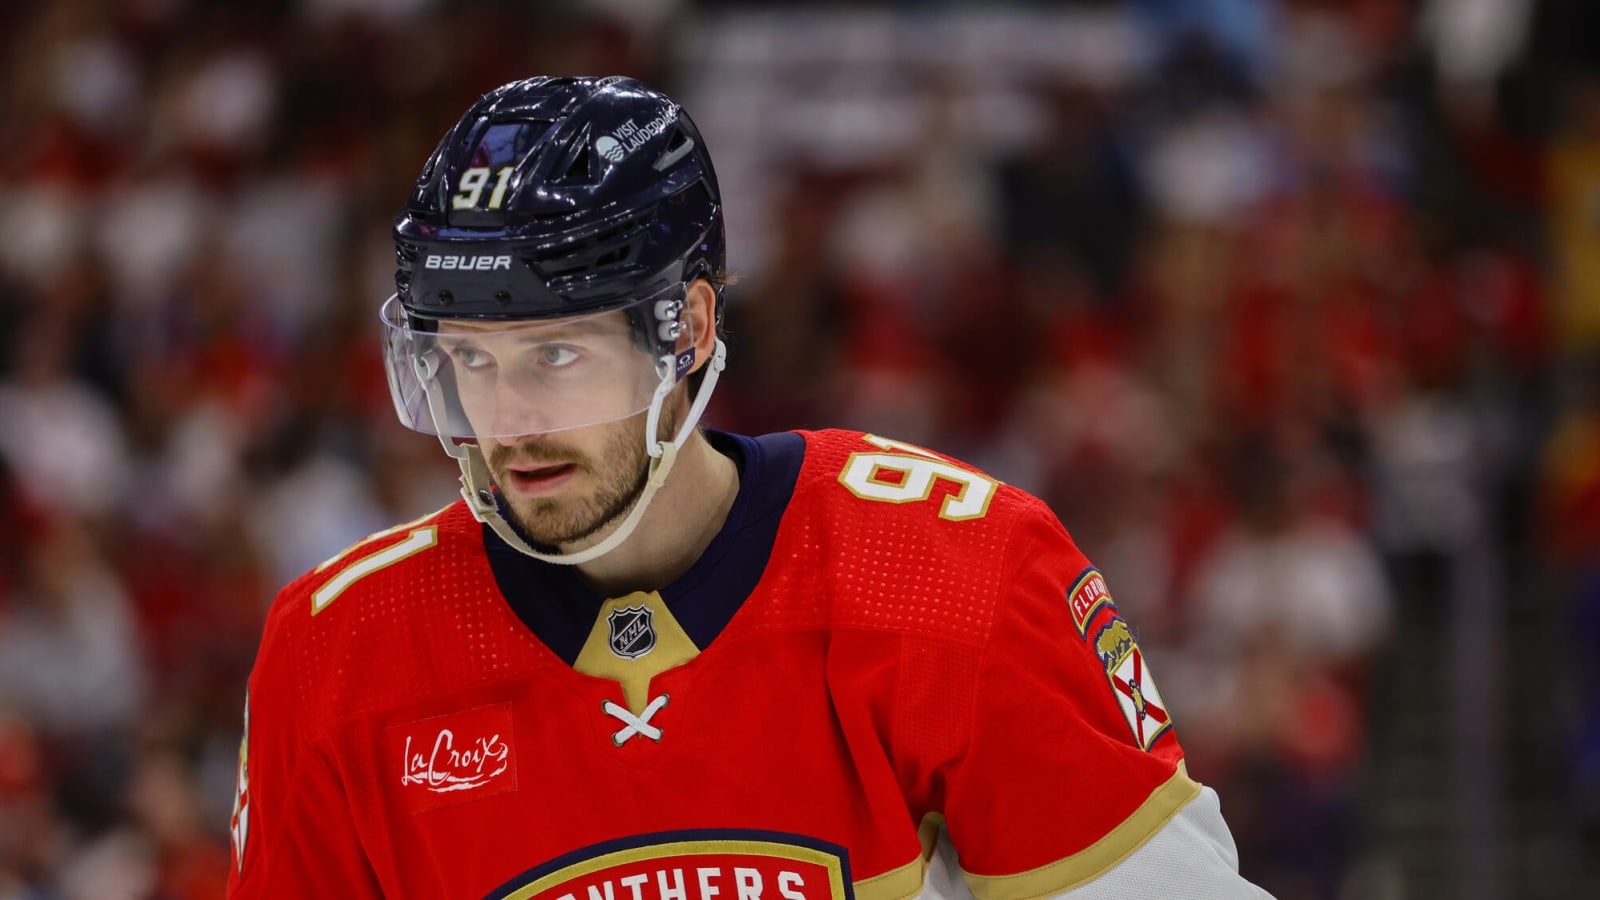 Florida Panthers: Oliver Ekman-Larsson Thrilled to be Back in Playoffs